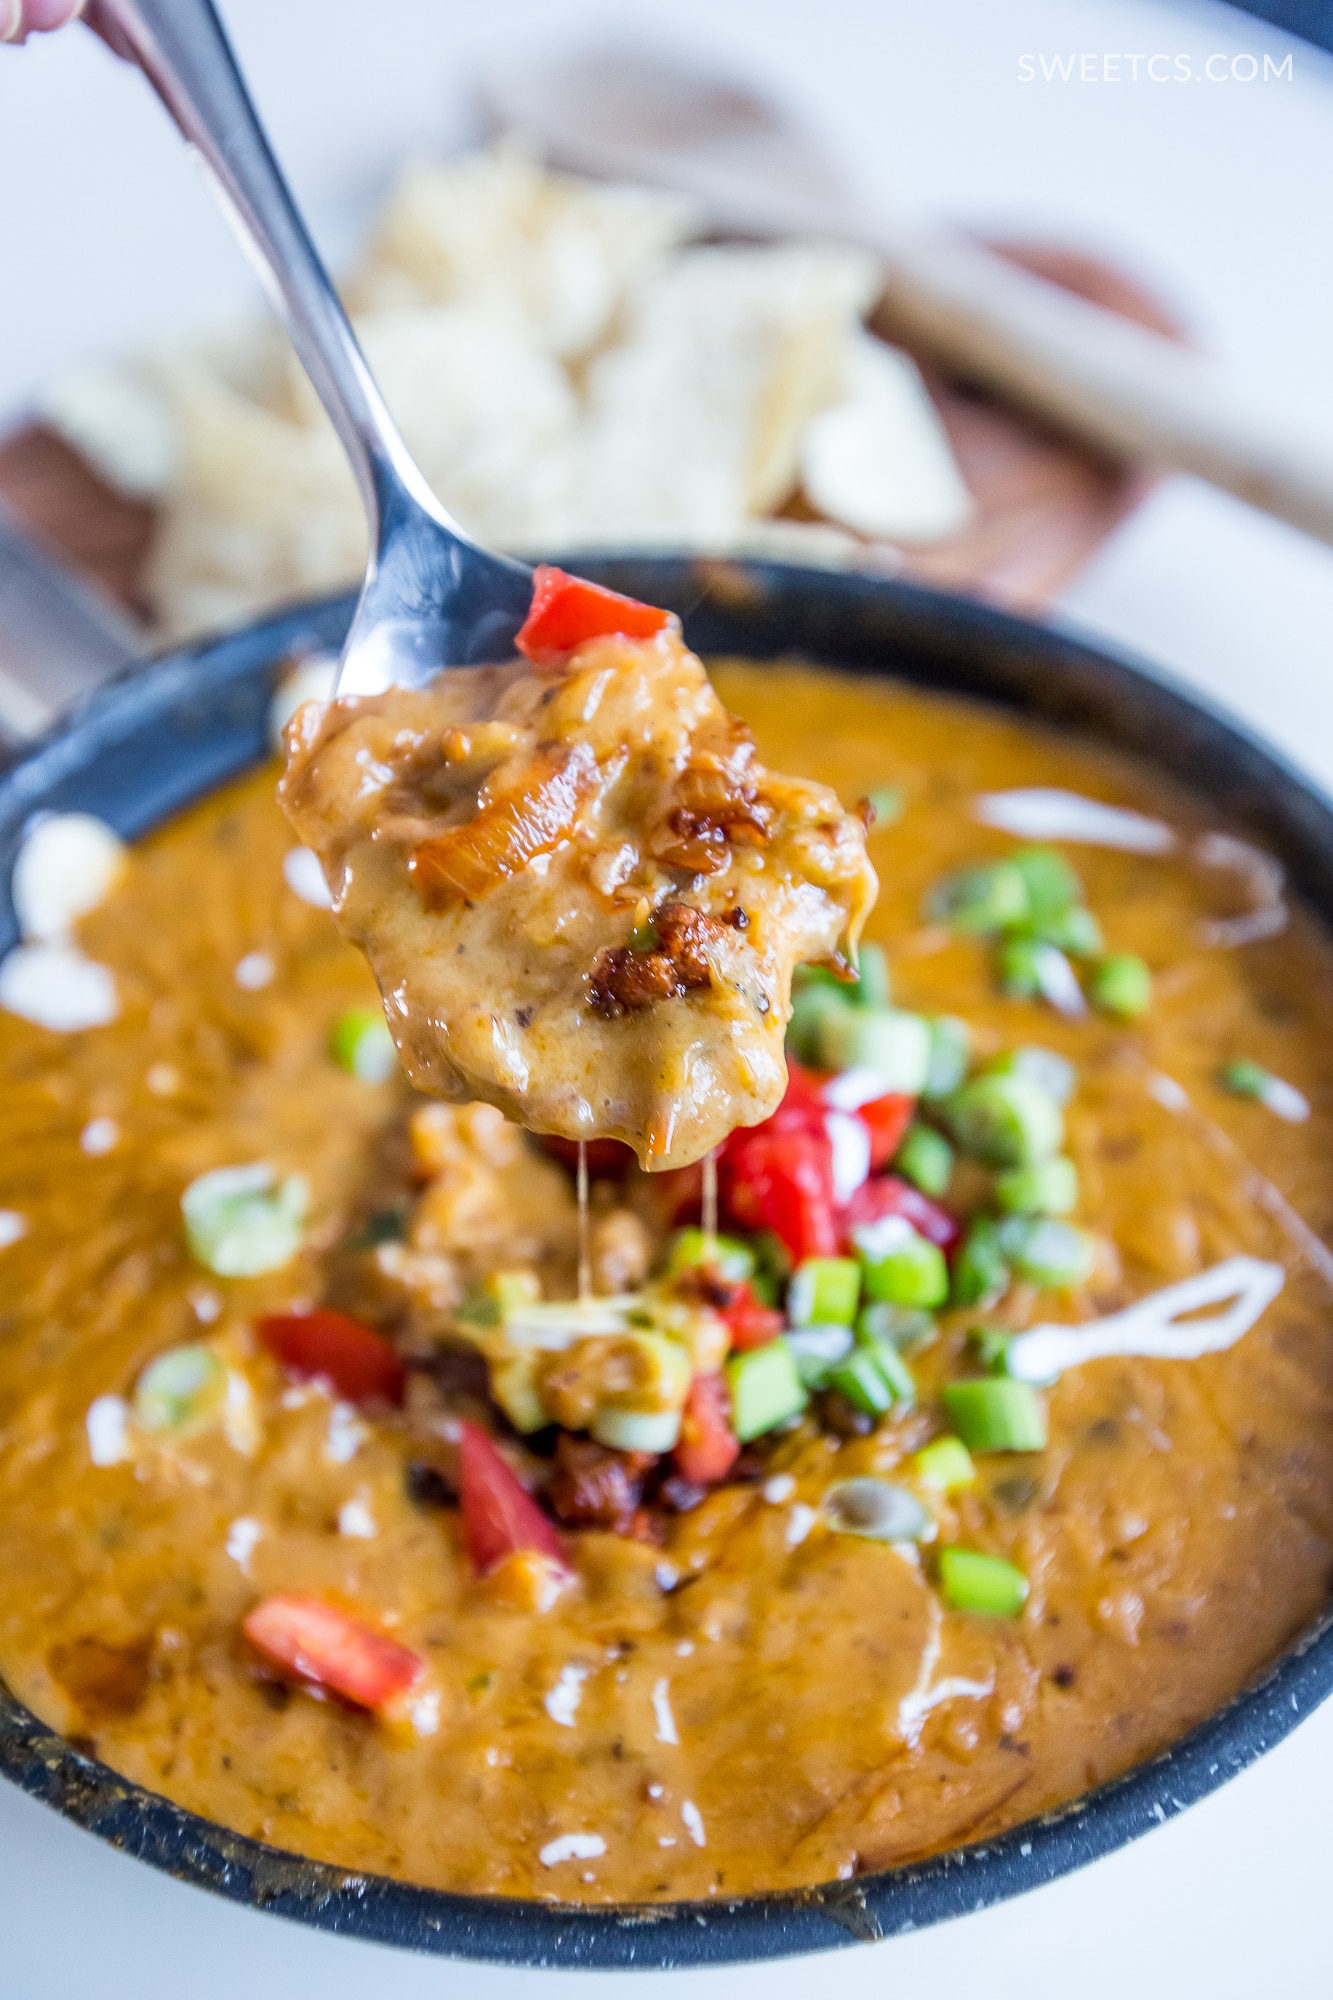 This spicy queso is made with fresh ingredients- no processed junk and it is so easy!